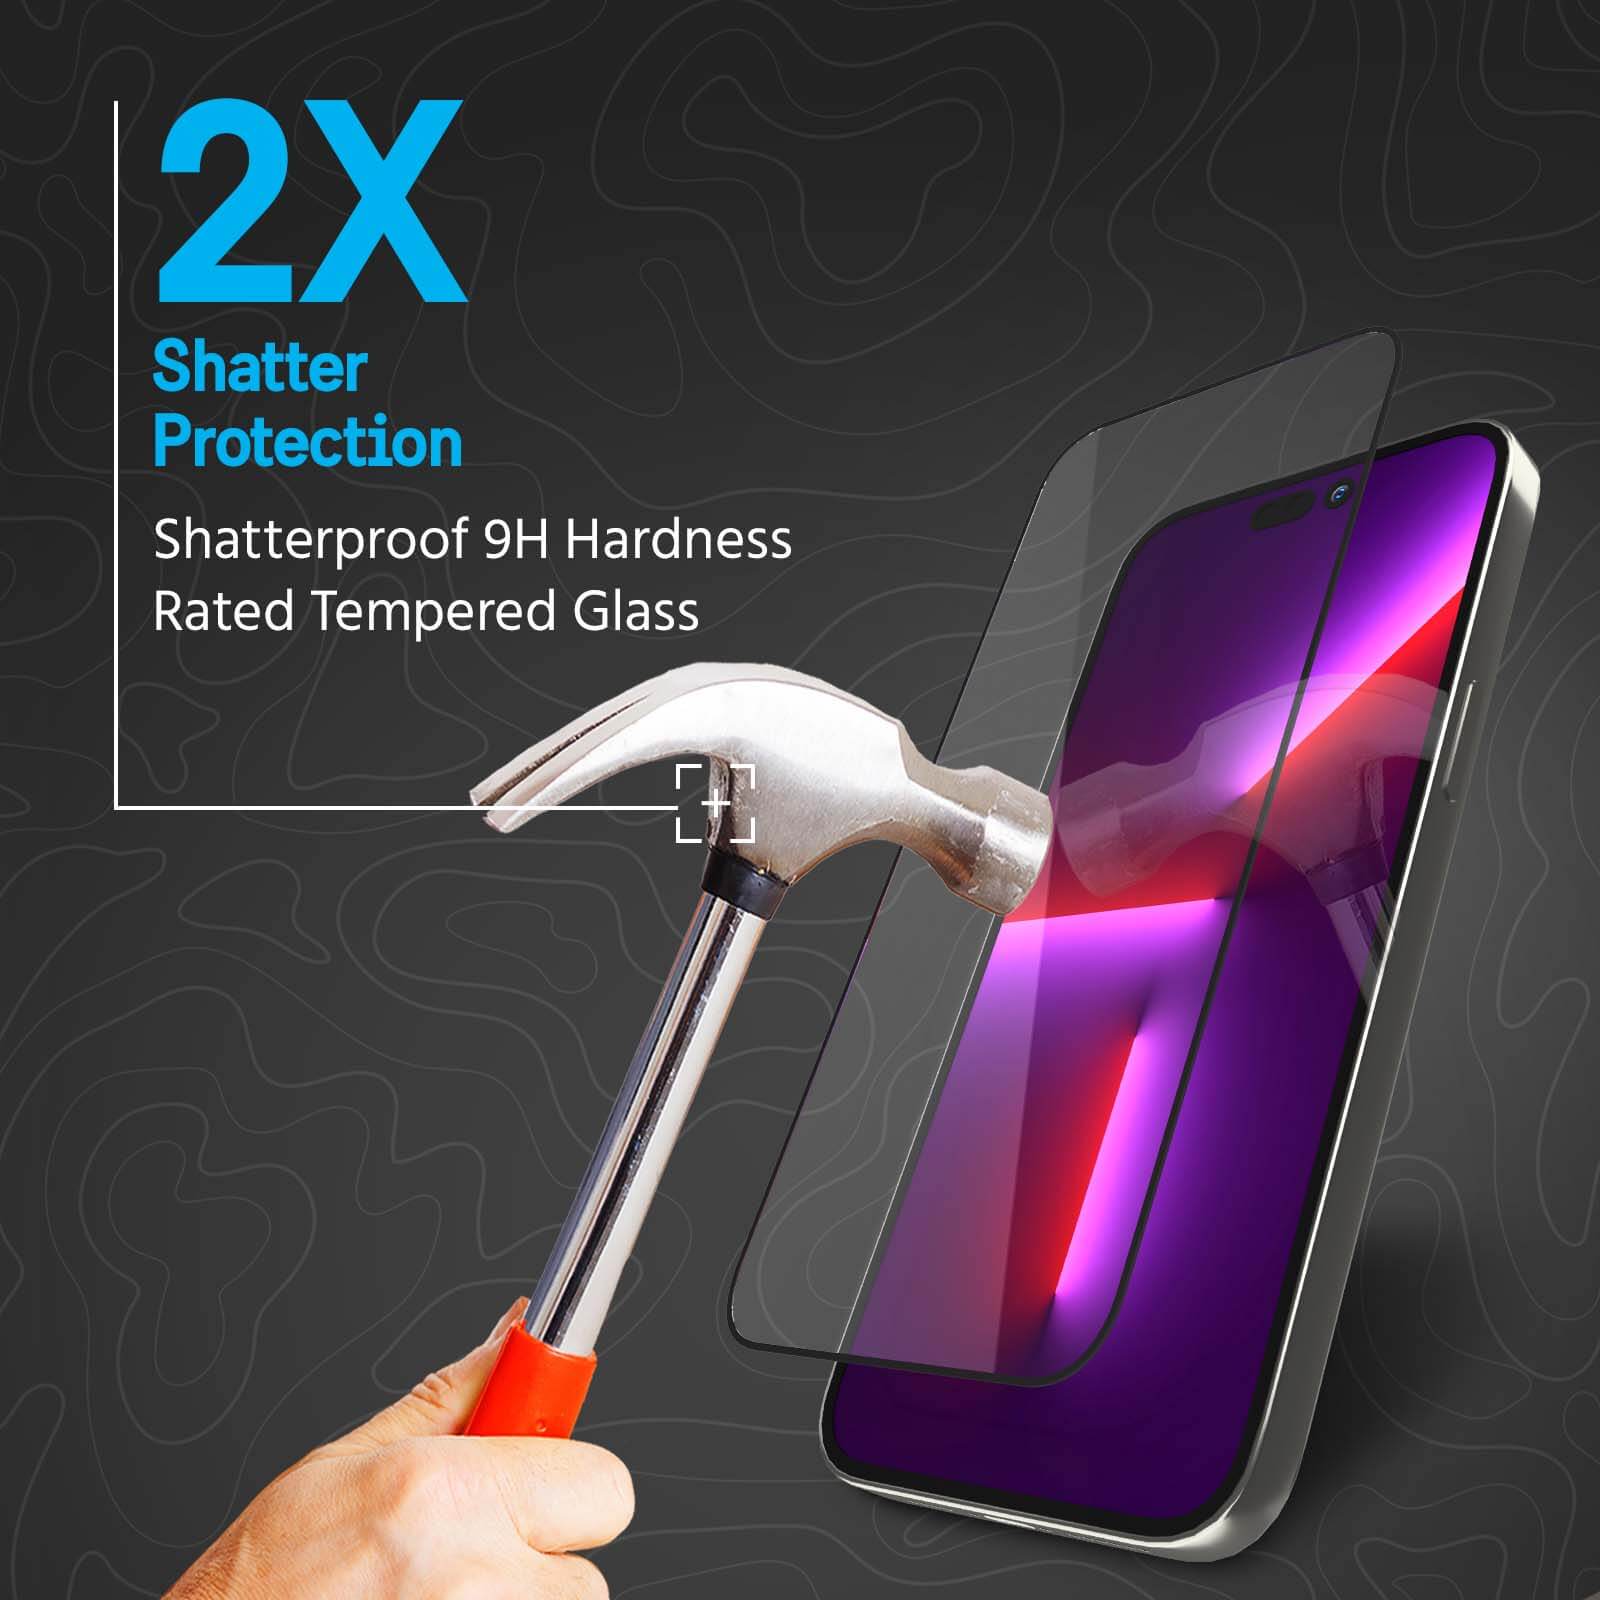 2x Shatter Protection shatterproof 9h hardness rated tempered glass. color::clear